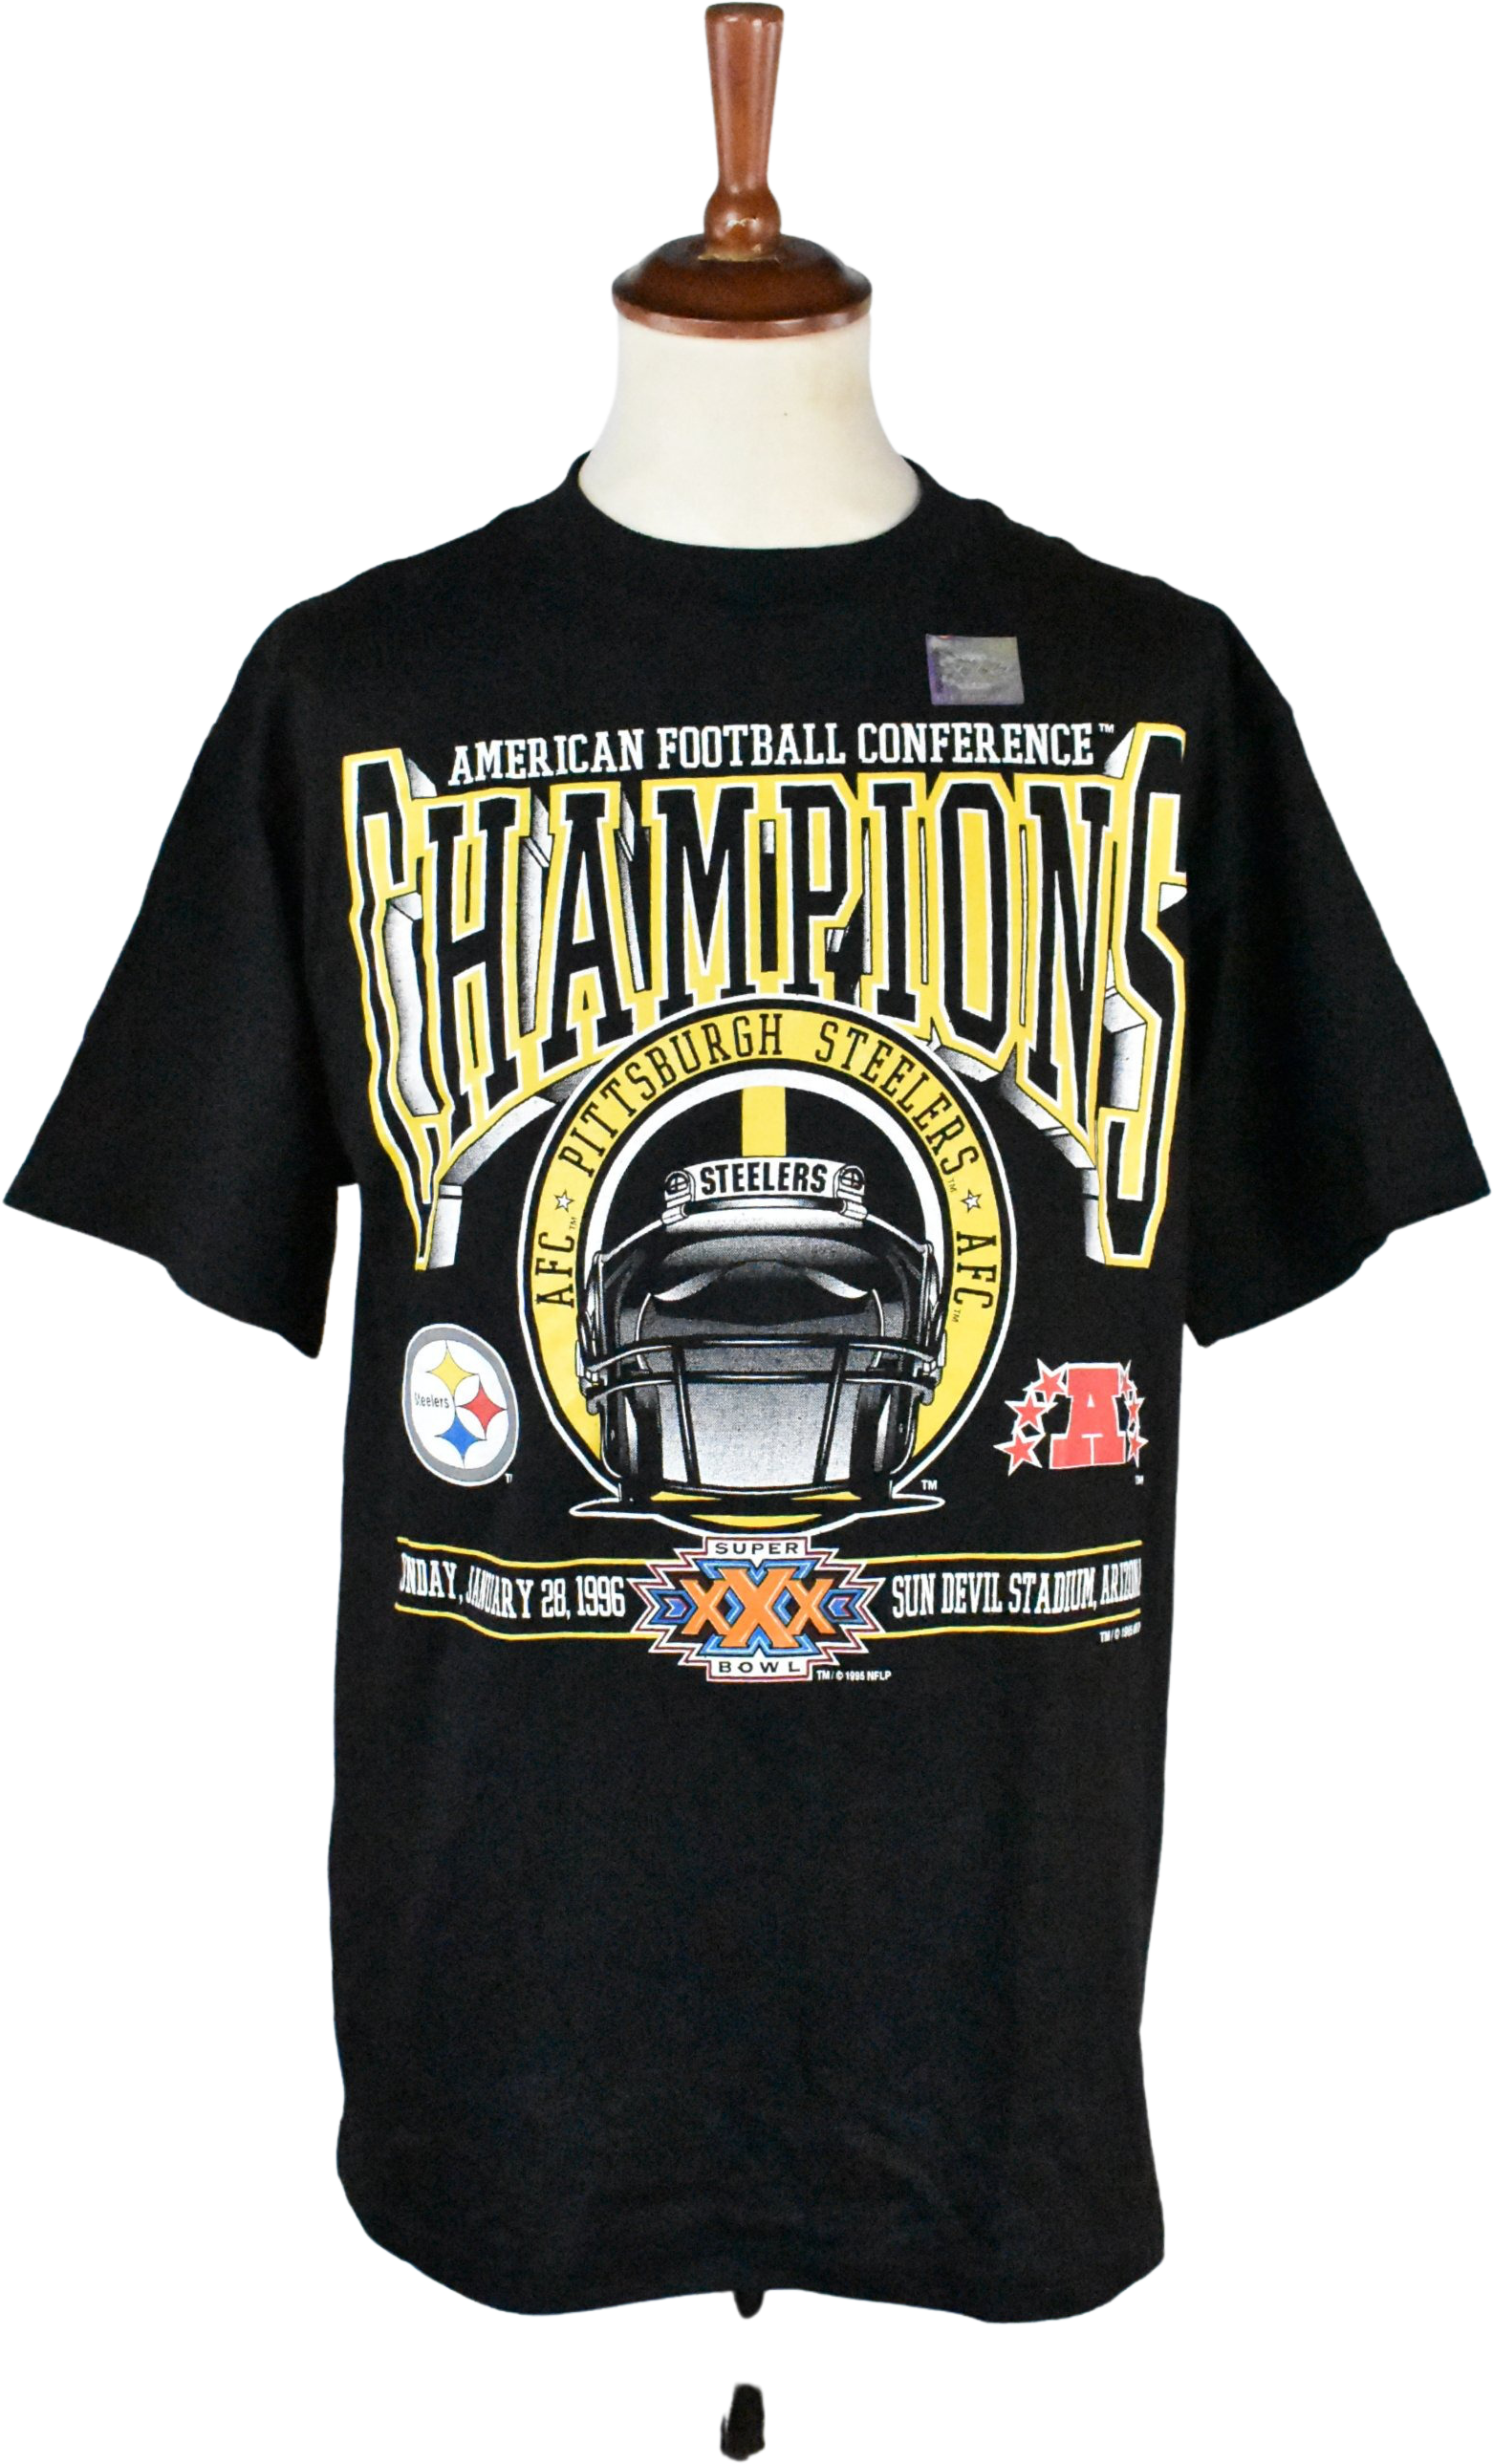 steelers afc champions